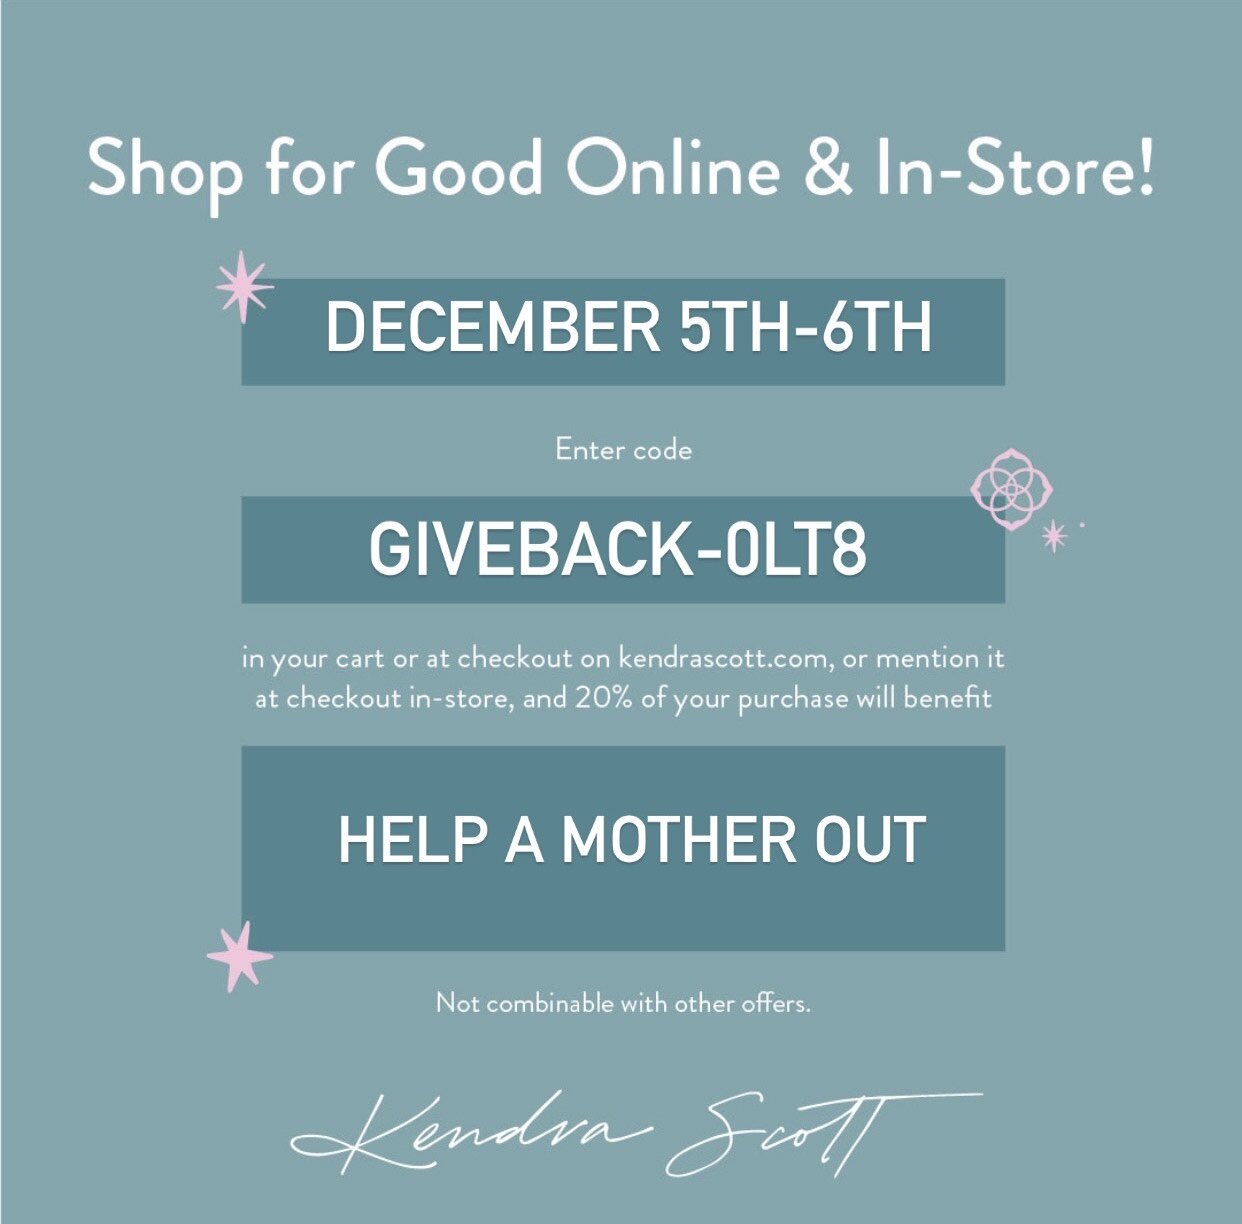 Join an Event — Help a Mother Out